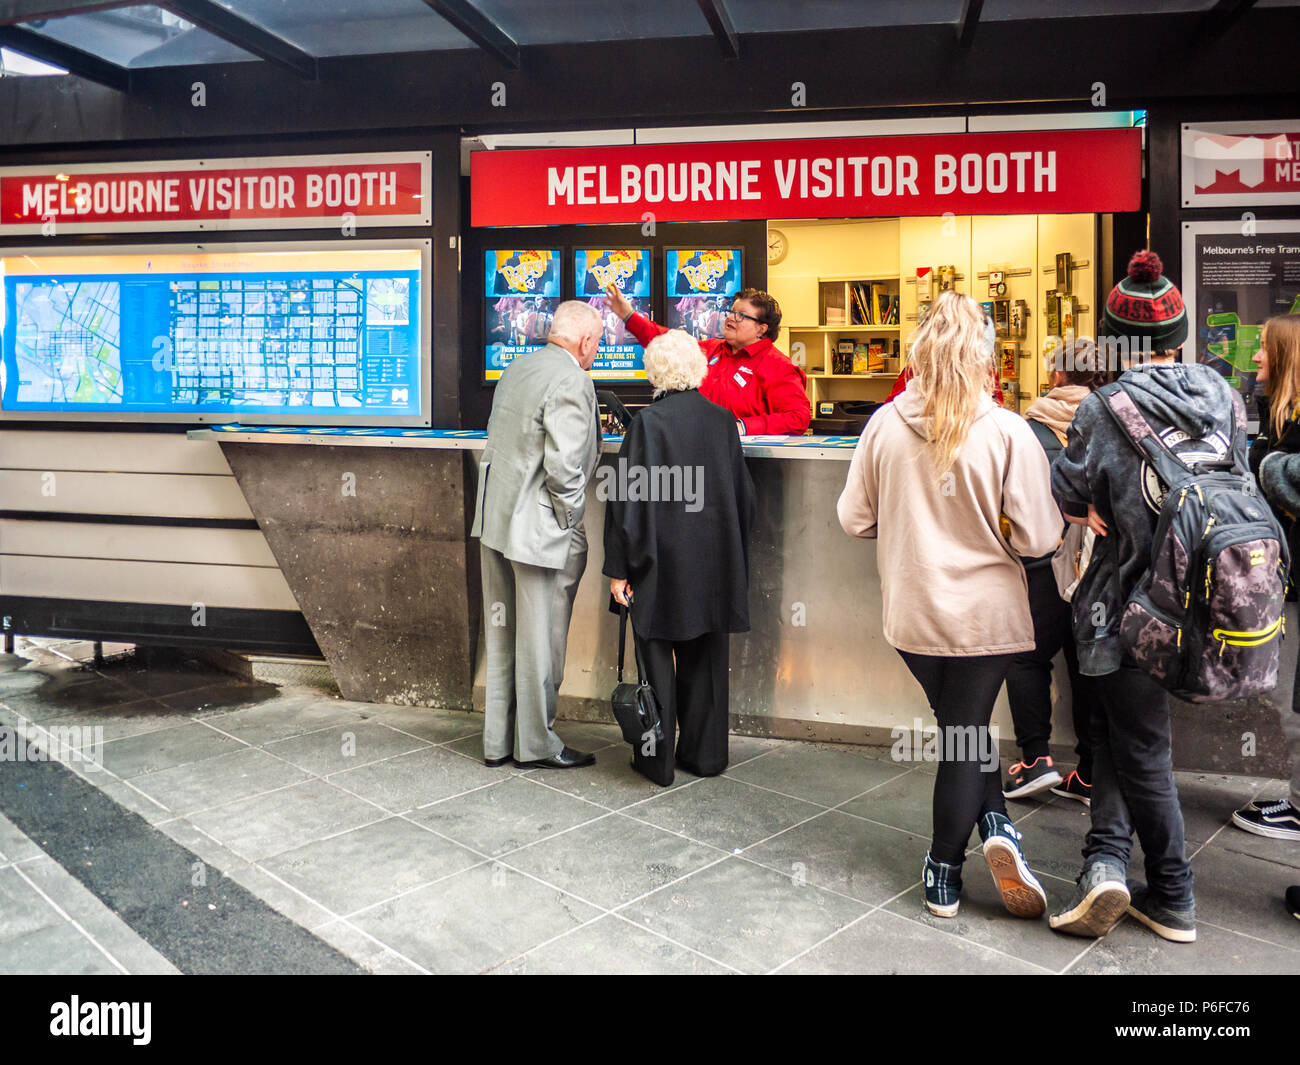 Staff helping tourists at Melbourne Visitor Booth. The booth is staffed by trained volunteers and conveniently located in the Bourke Street Mall. Stock Photo